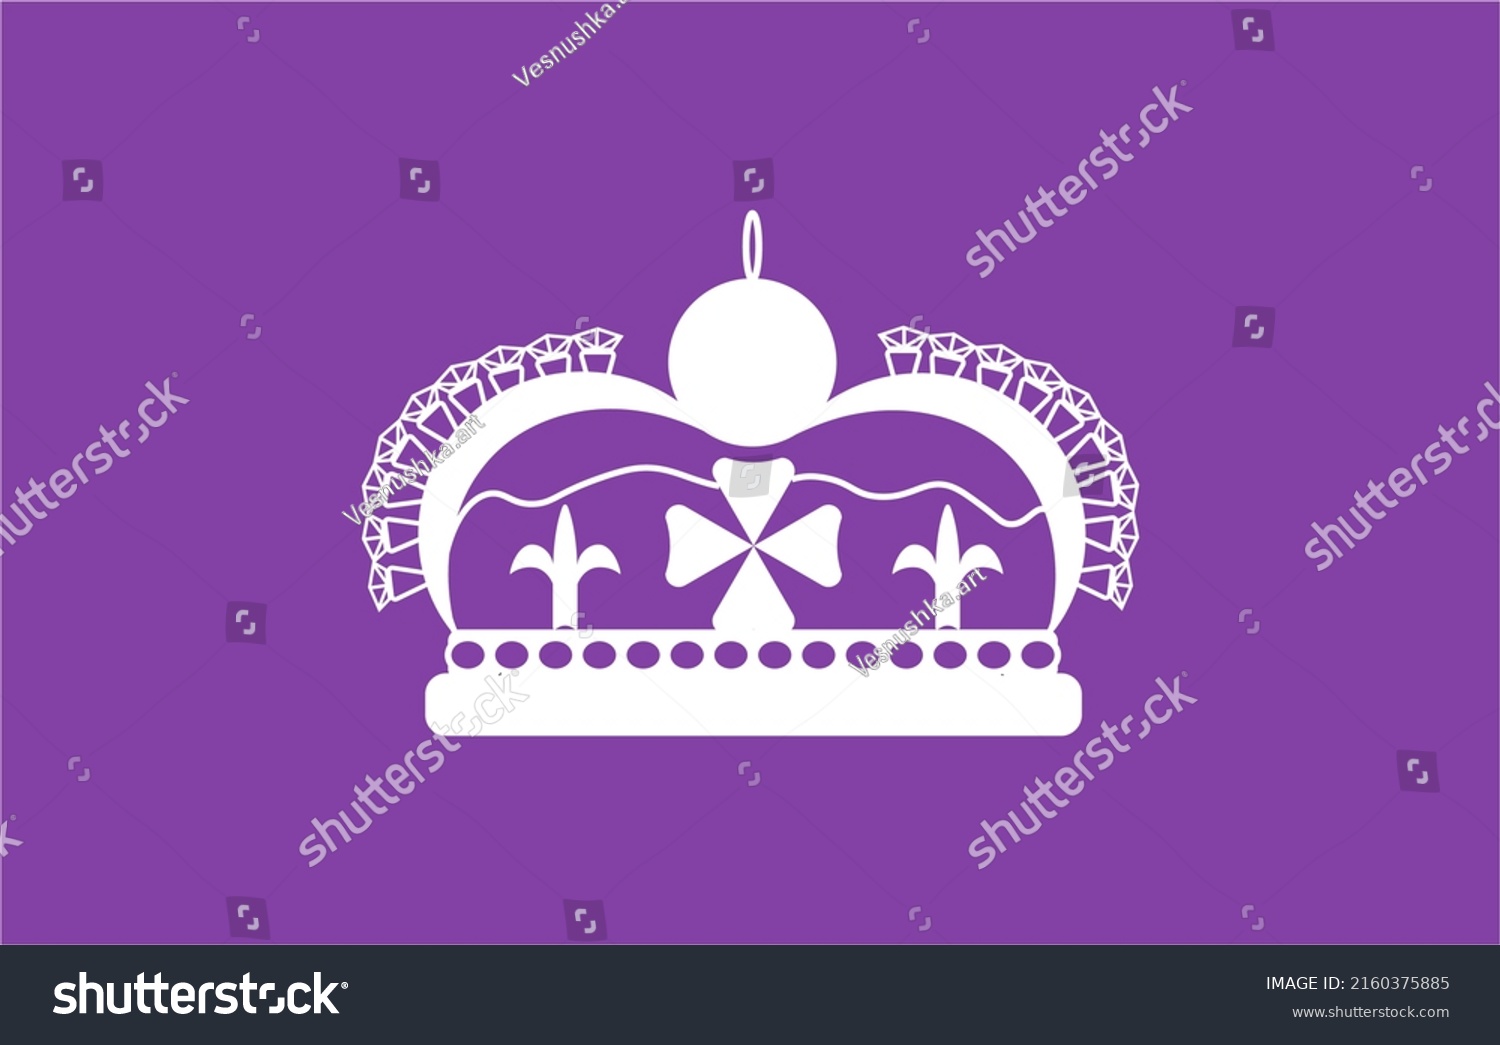 SVG of A banner with a crown for the 70th anniversary of the Queen. Vector illustration for design, covers, stickers, social networks, medals, badges, flyers, postcards, posters. svg